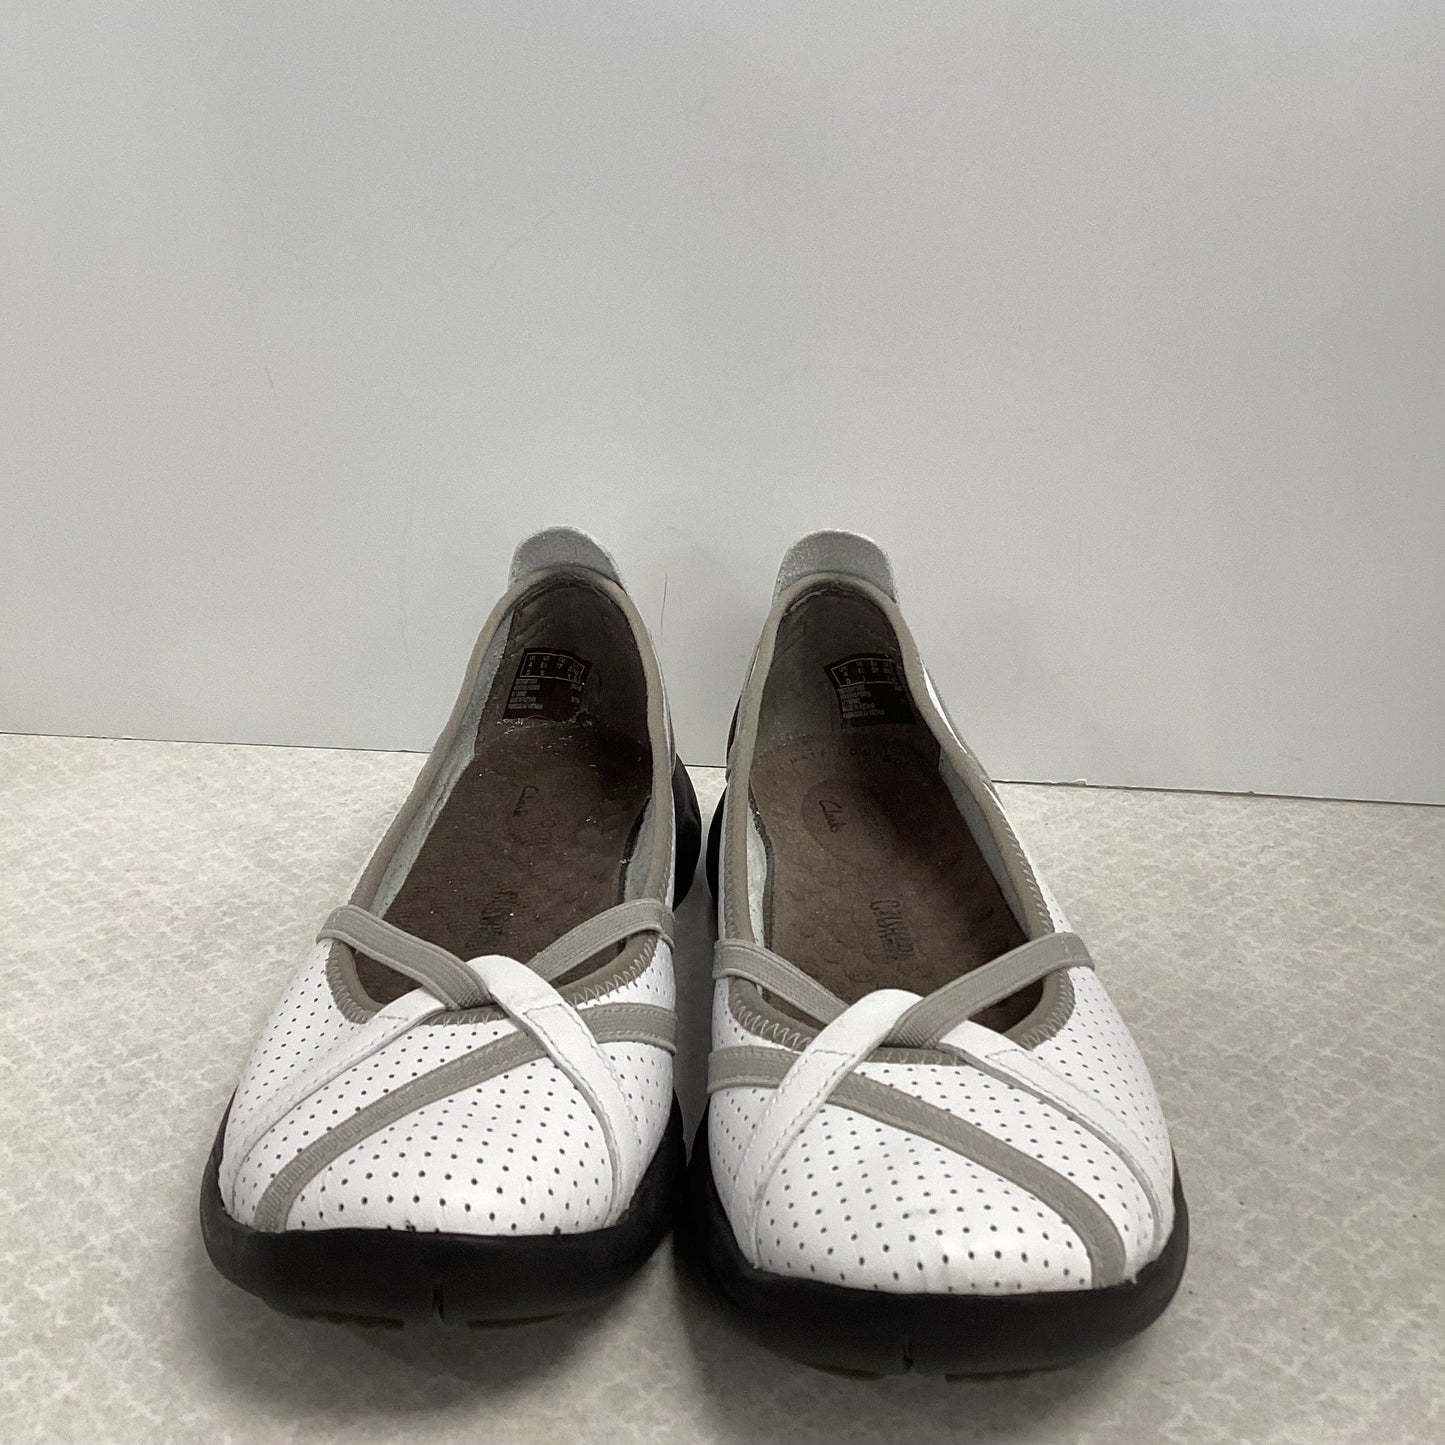 White Shoes Flats Clarks, Size 6.5